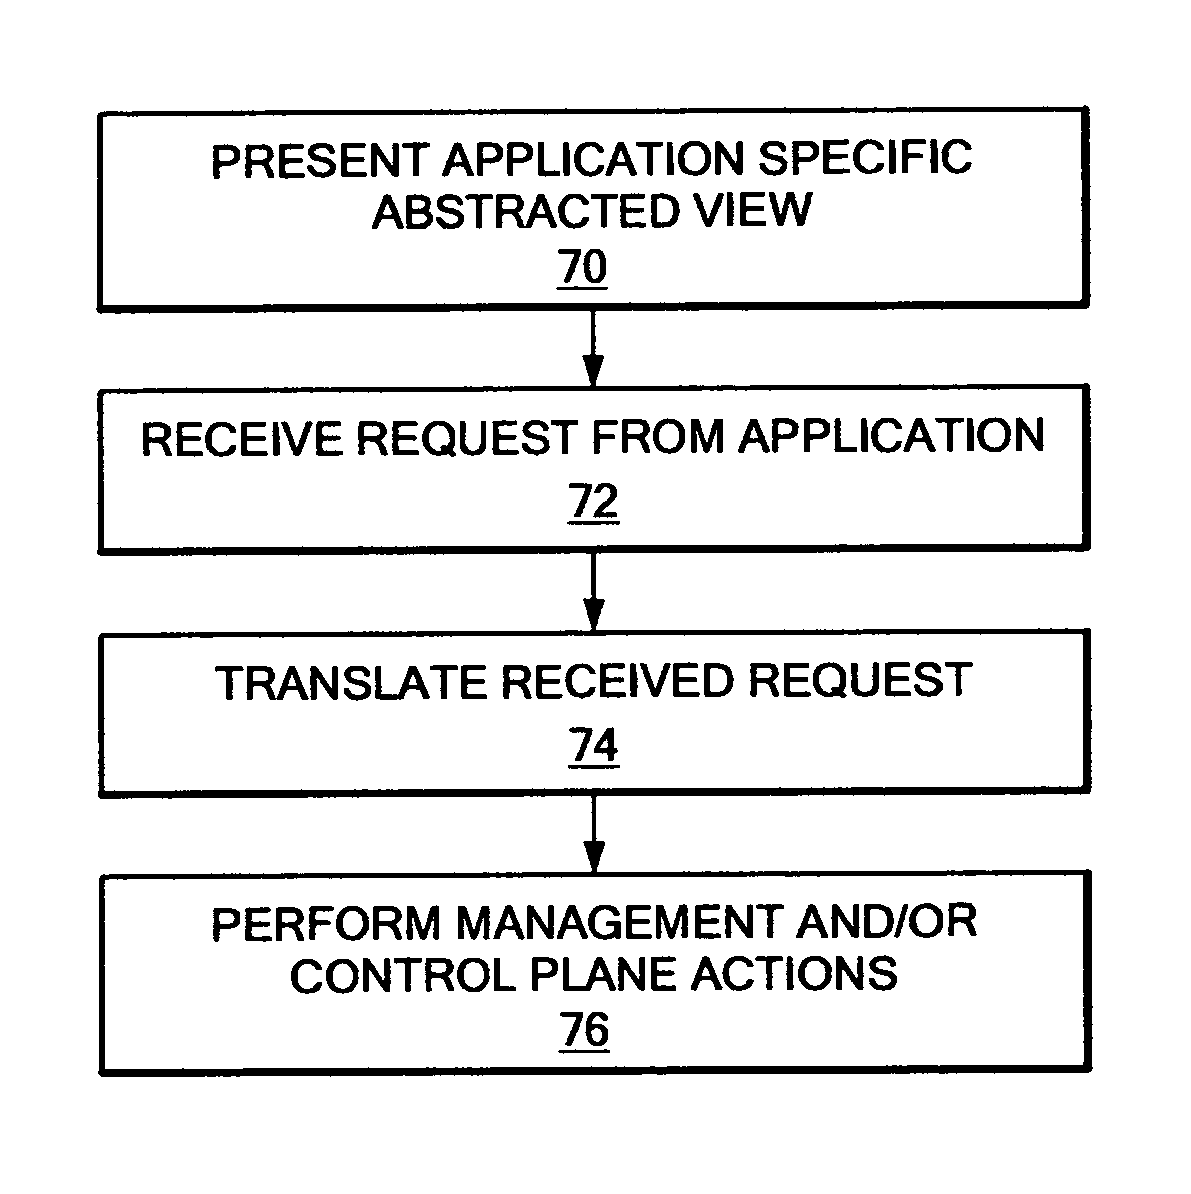 System and method for translating application program network service requests into actions and performing those actions through the management and/or control plane responsive to previously defined policies and previous requests by the same or another application program